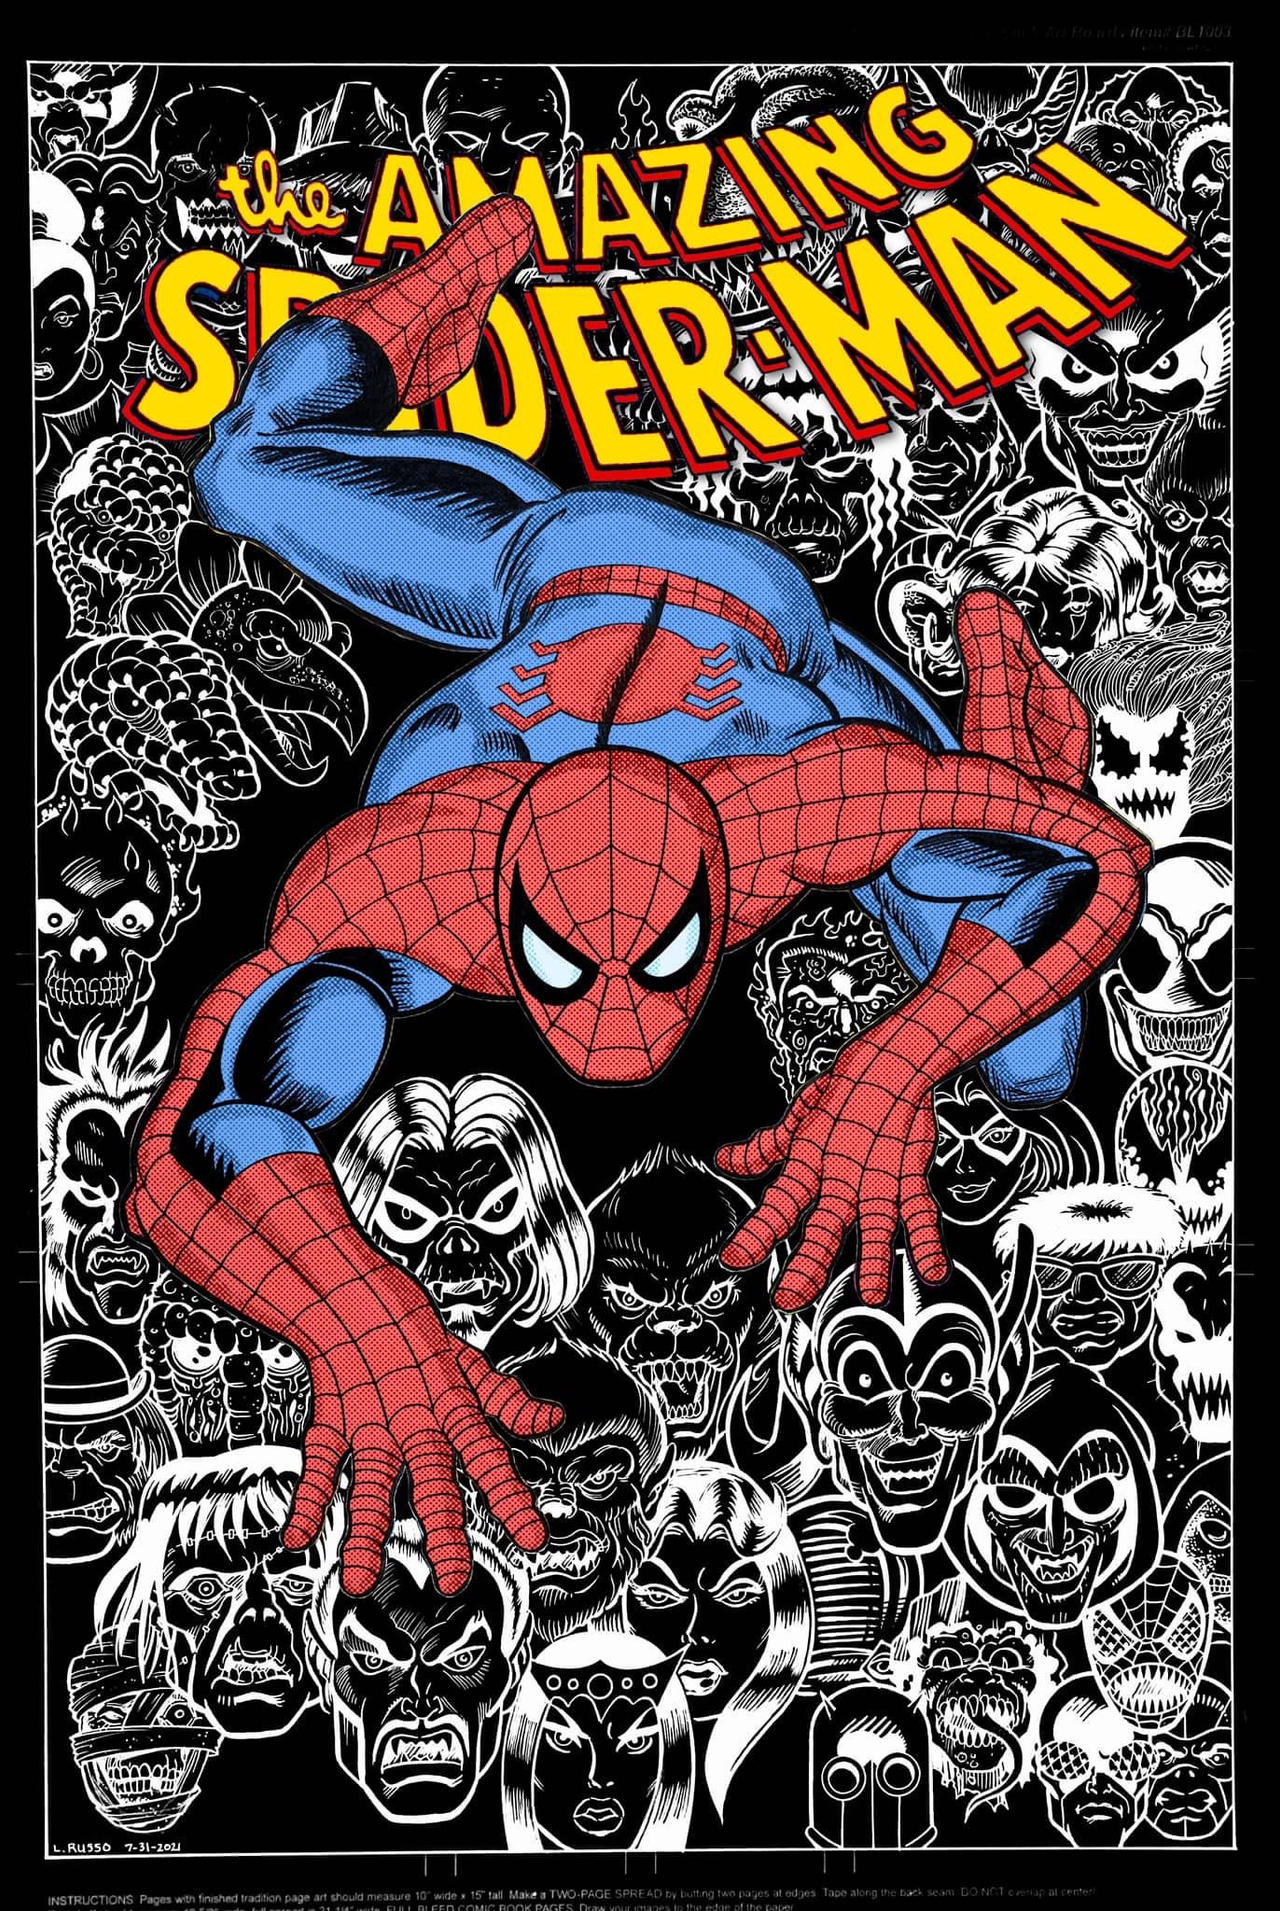 Spider-Man 100 with Monsters by LRusso72 on DeviantArt